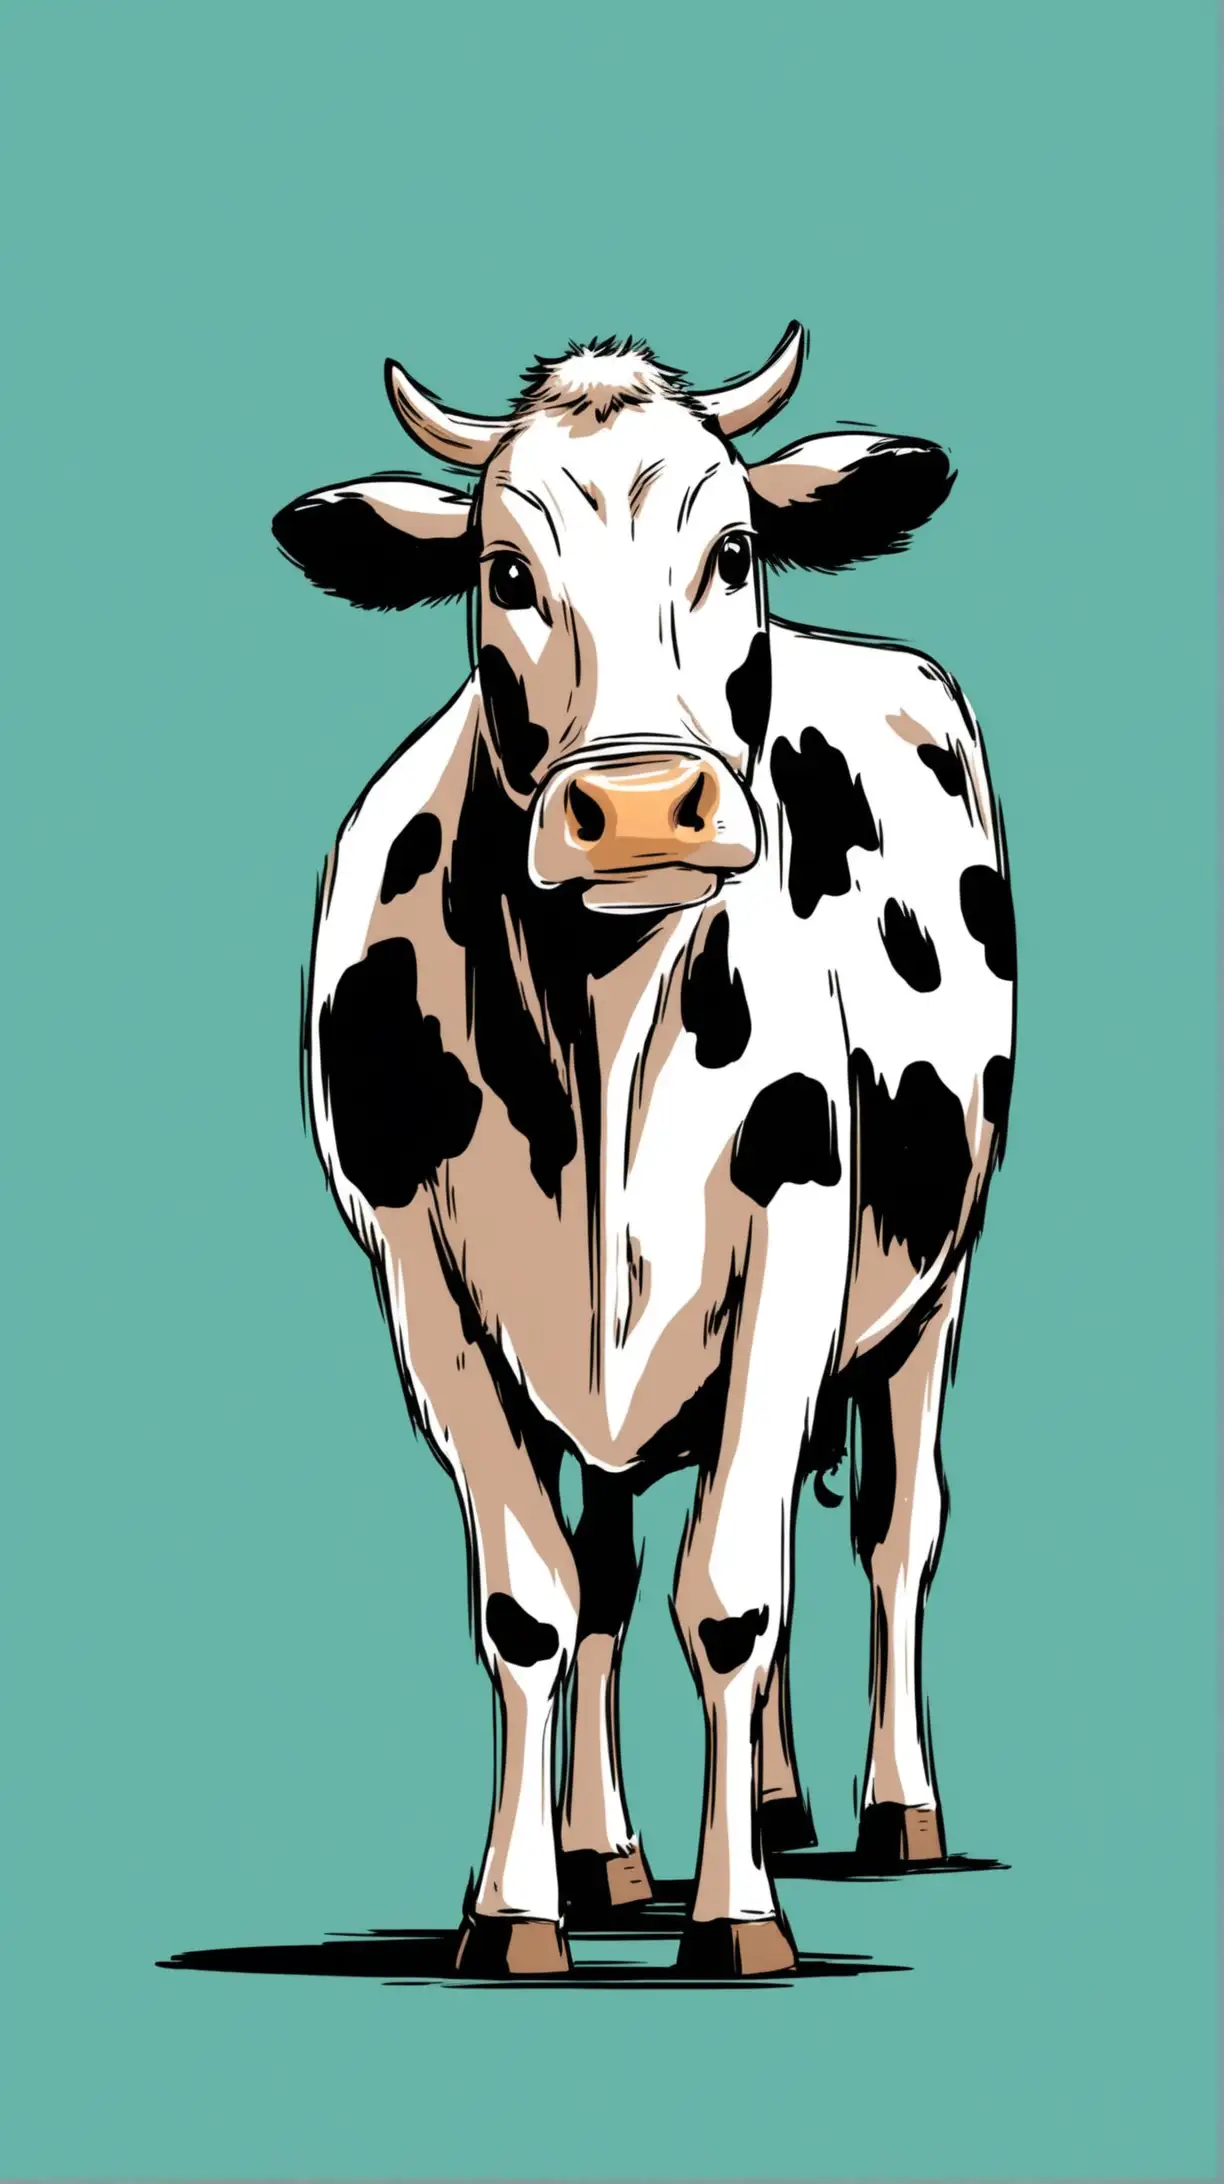 Comic Book Style Medium Shot of a FrontFacing Cow